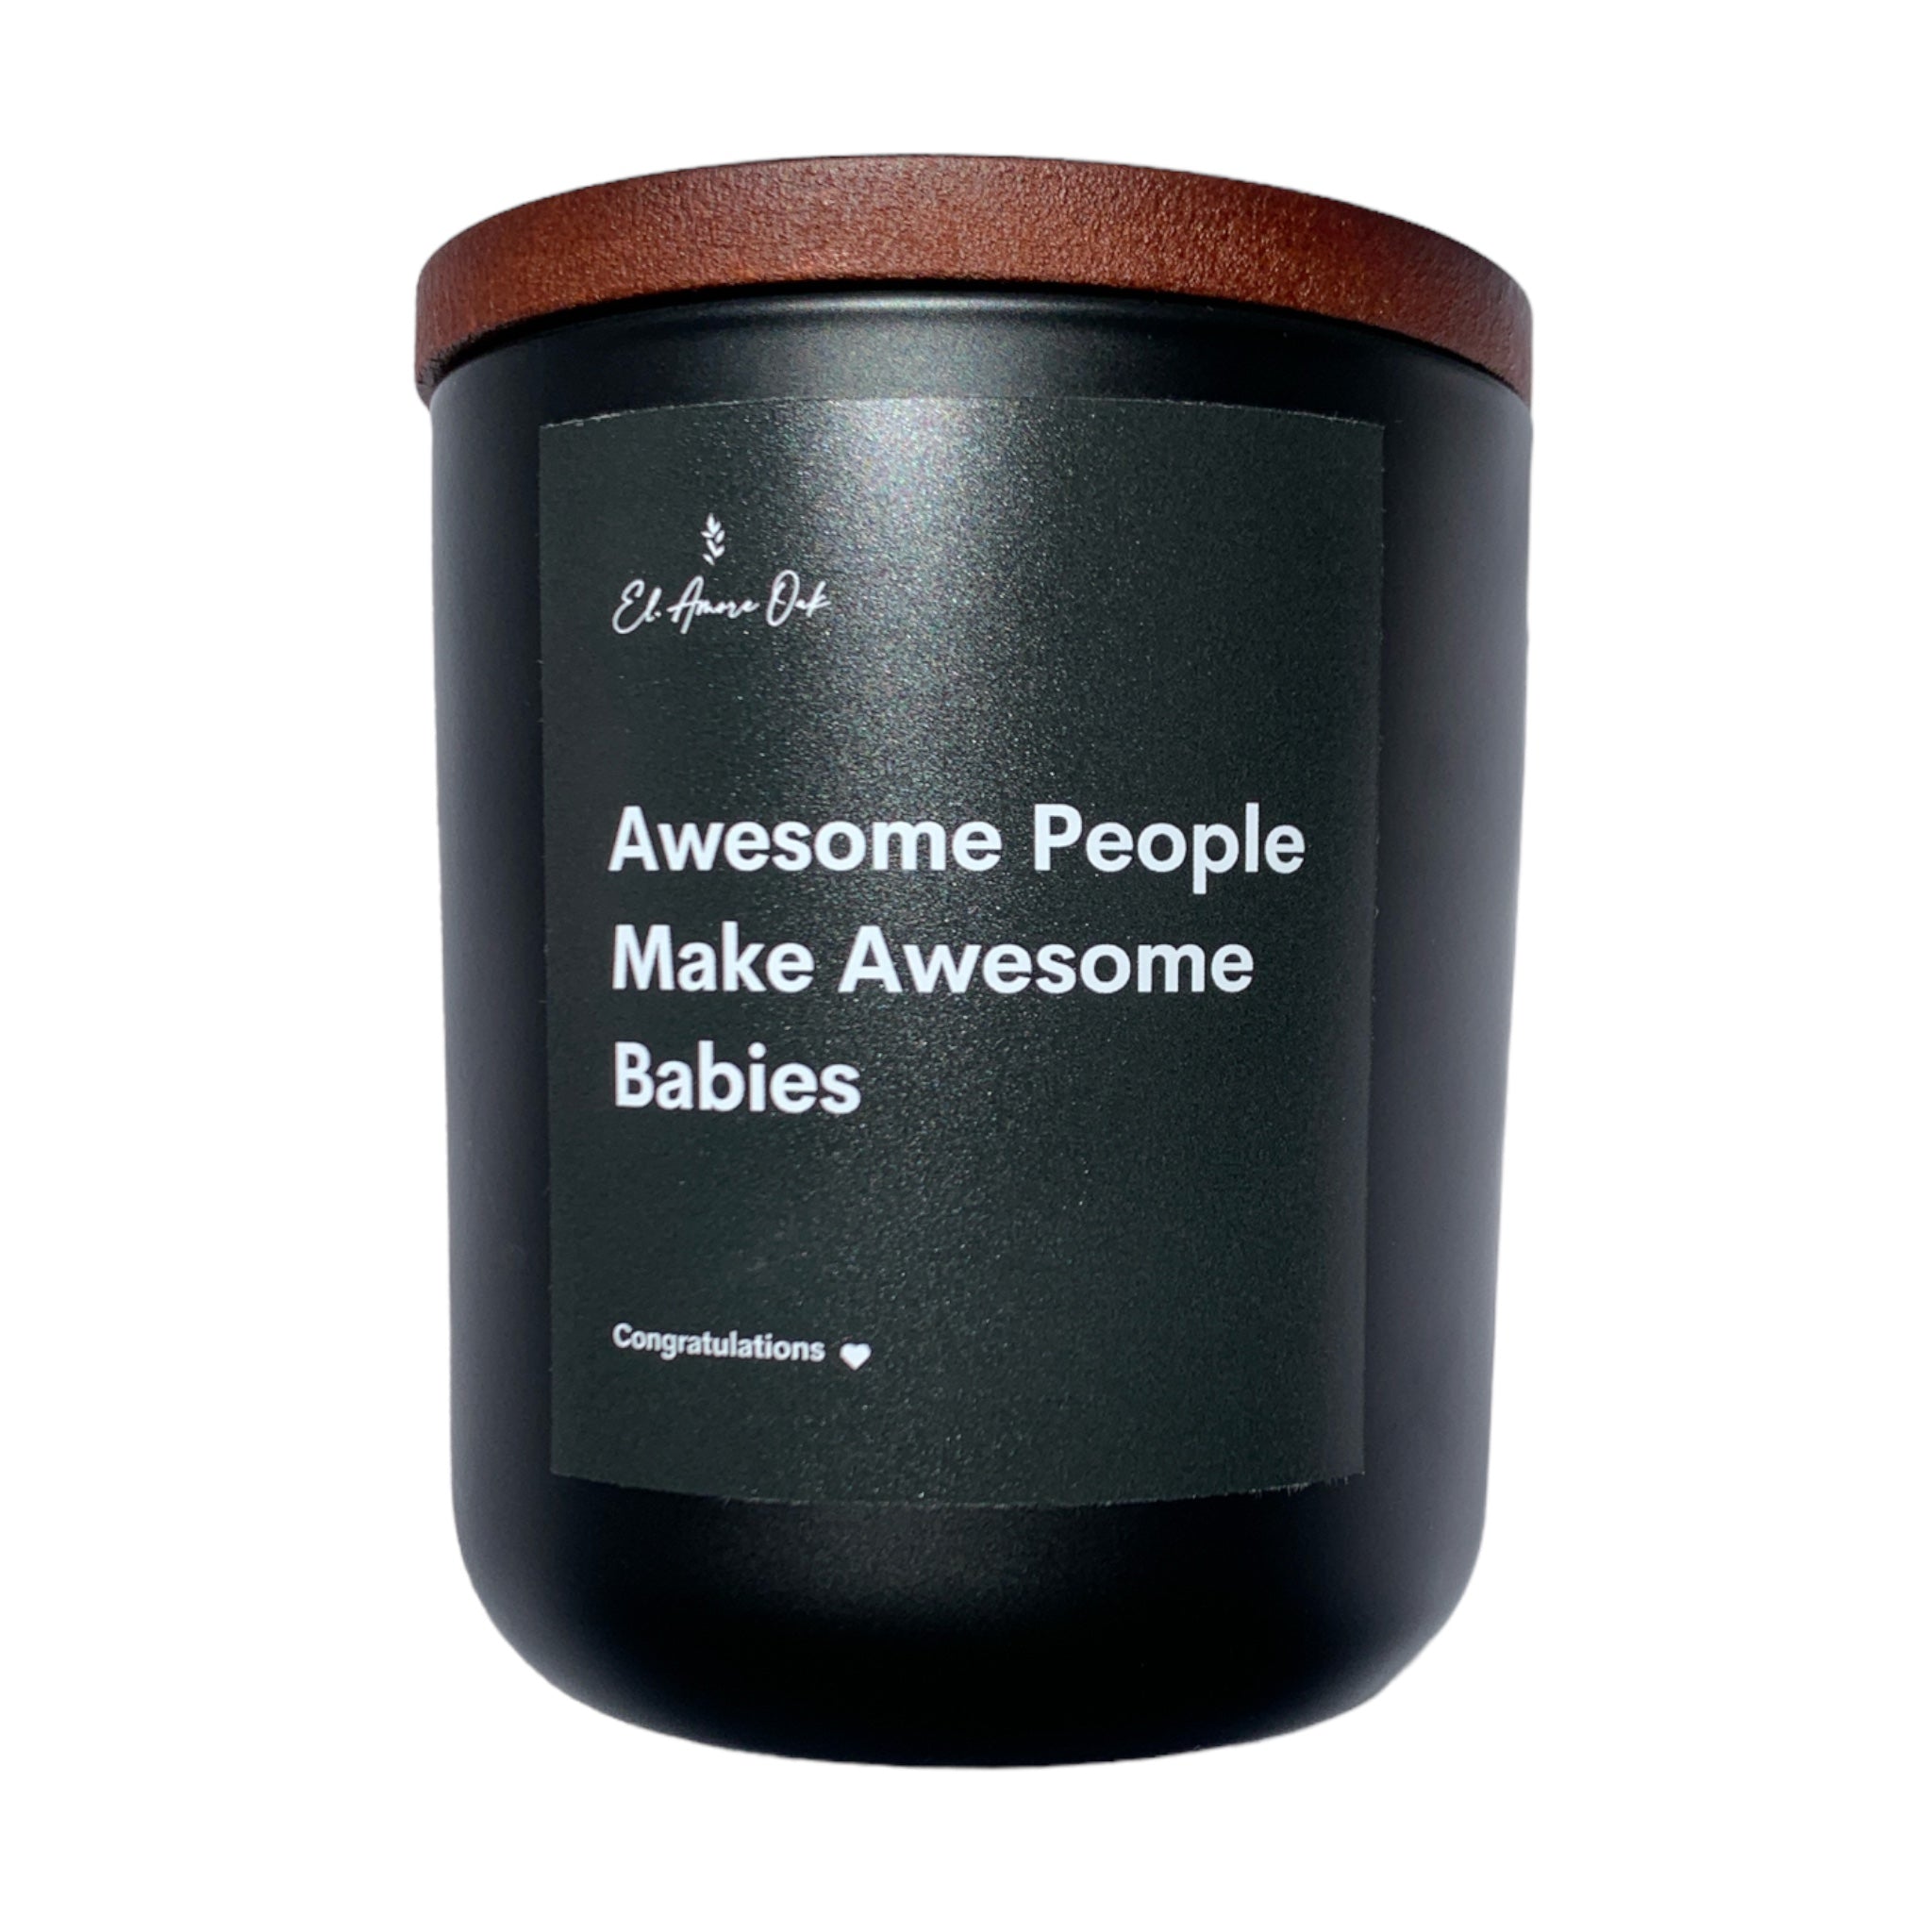 Awesome People Make Awesome Babies Themed Wooden Wick Candle